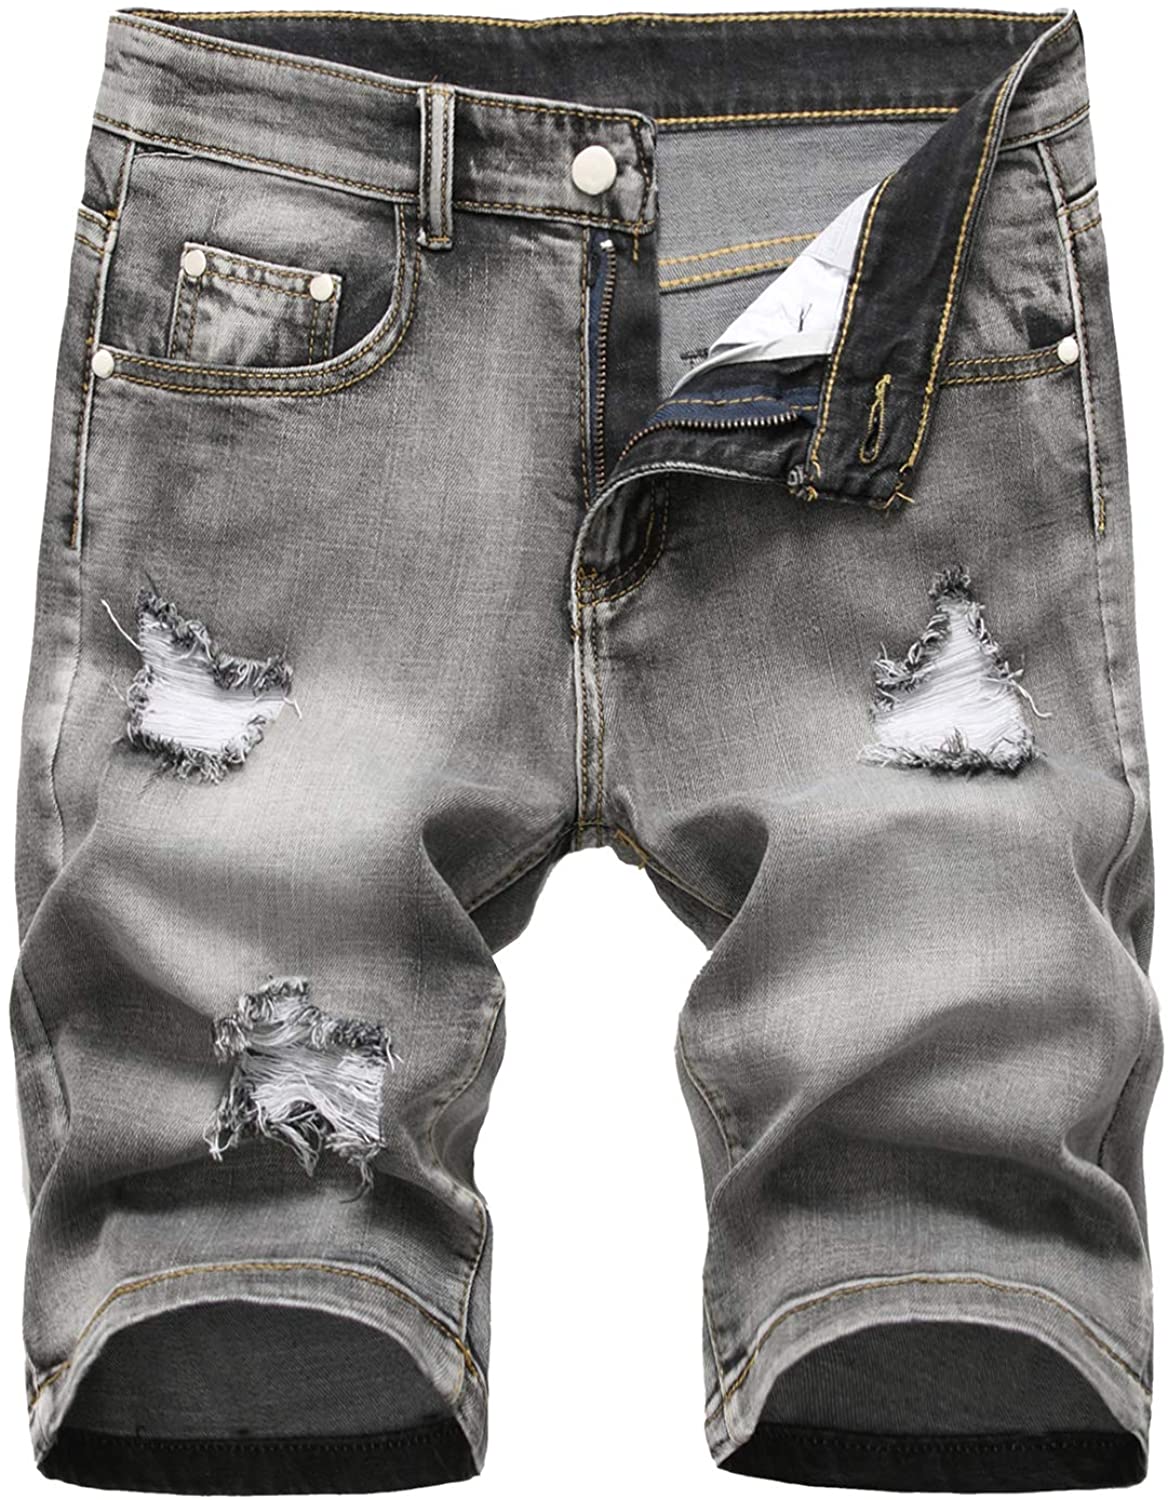 Amoystyle Mens Stretch Ripped Jean Shorts